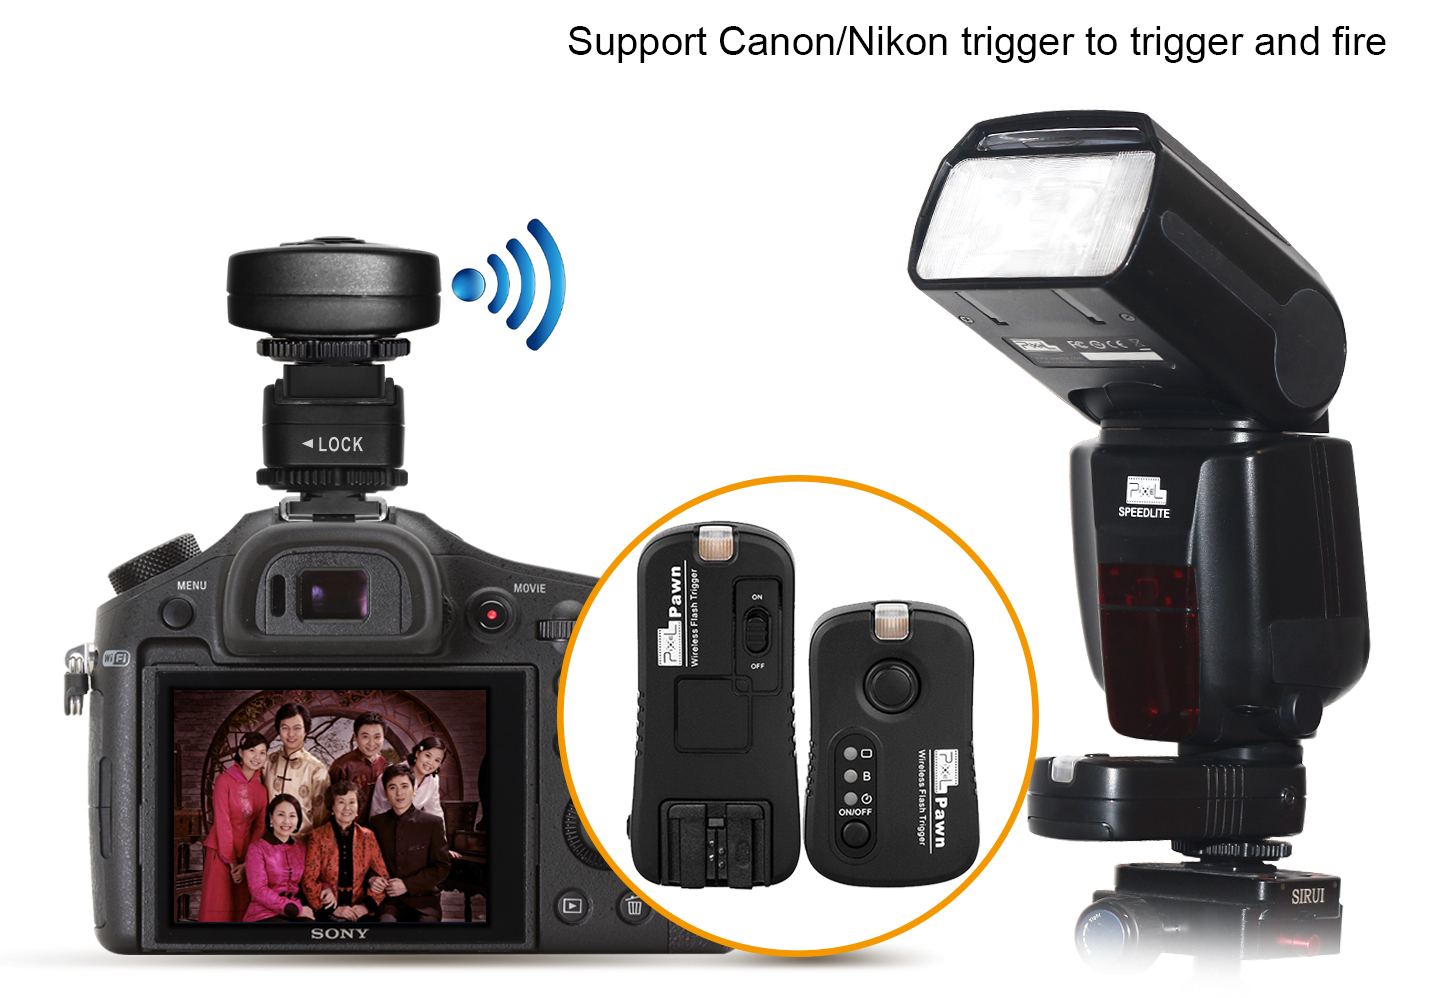 Support Canon/Nikon trigger and fire